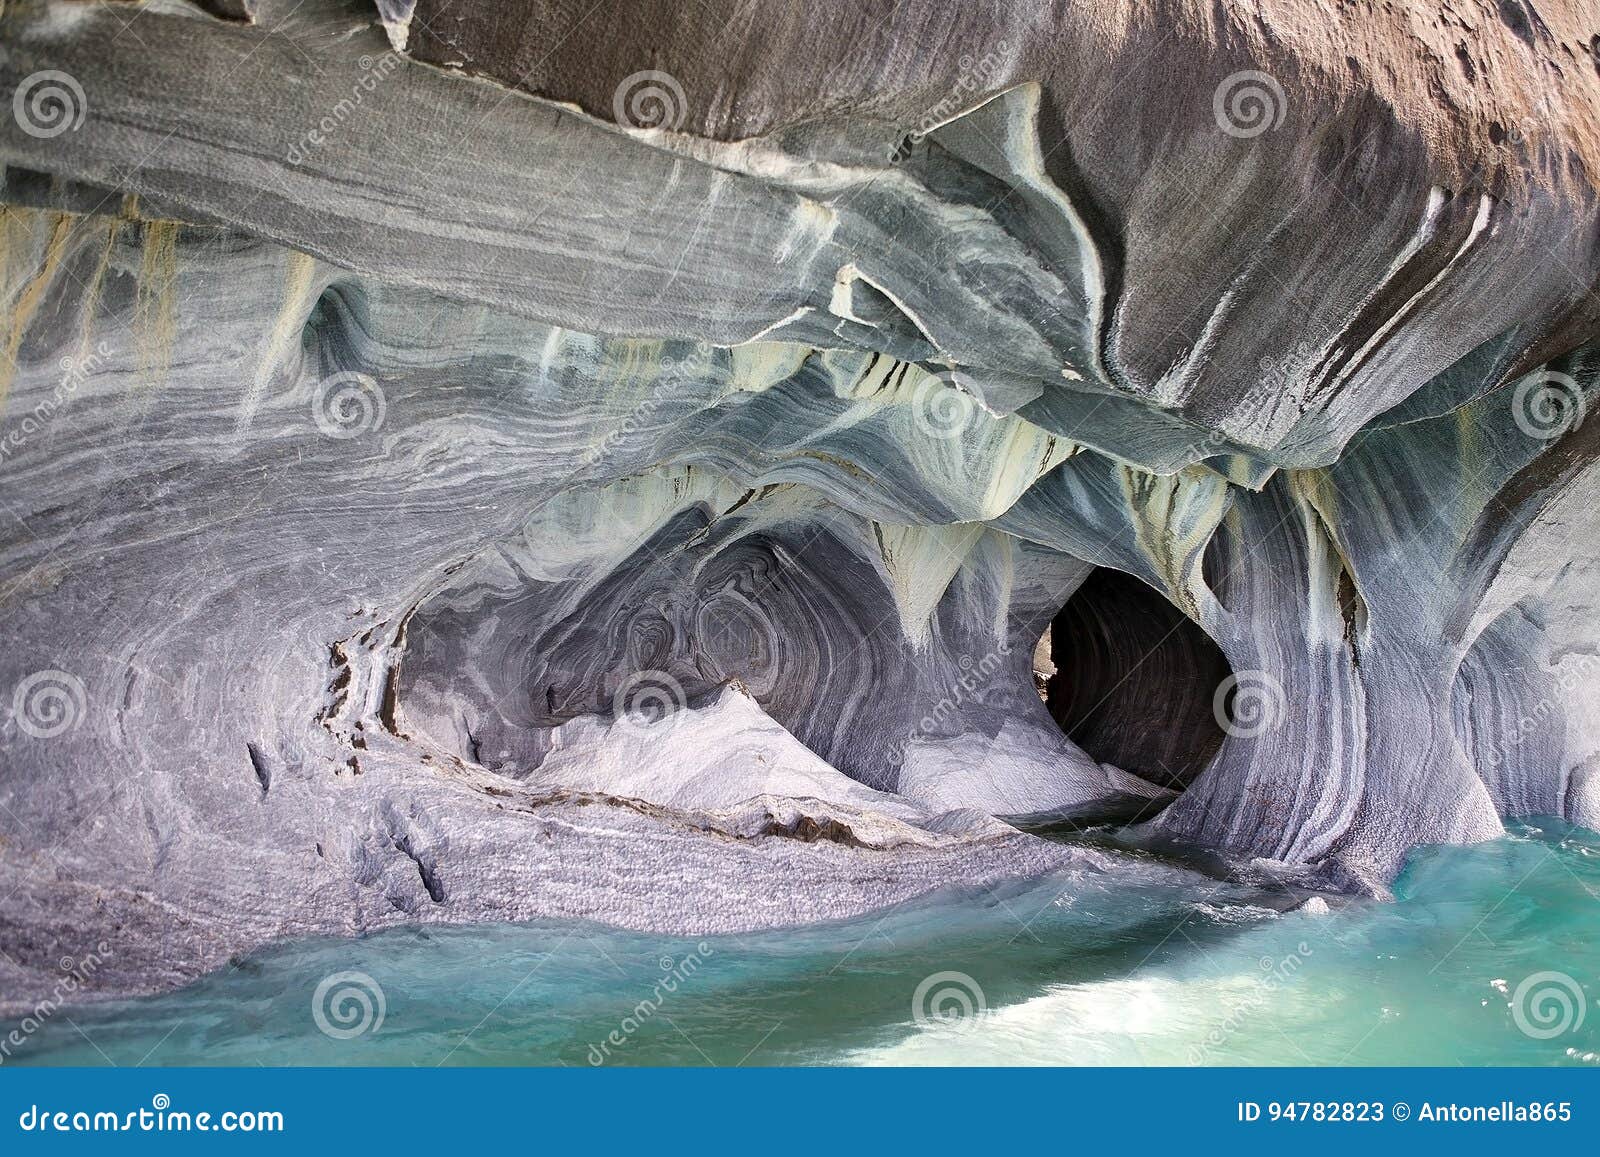 the marble cathedral at the general carrera lake, patagonia, chile